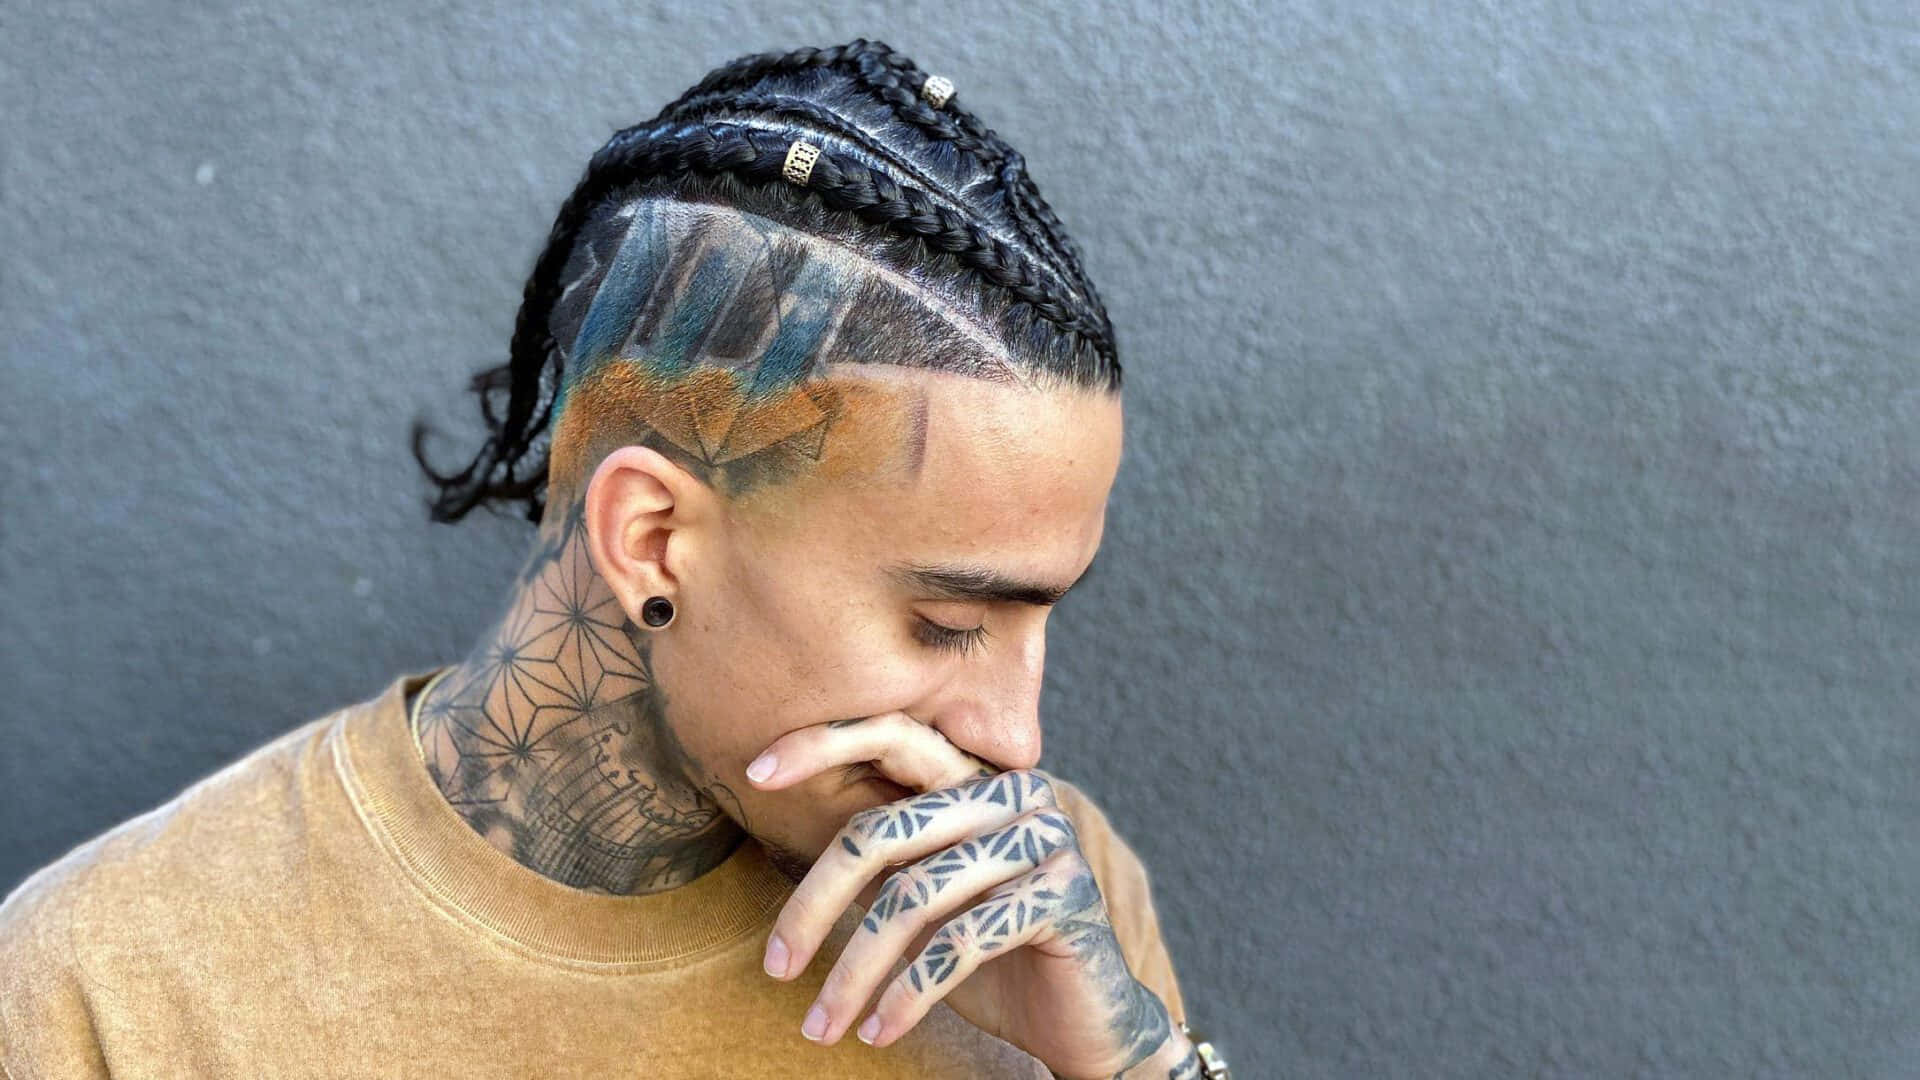 A Man With Tattoos And A Braided Hairstyle